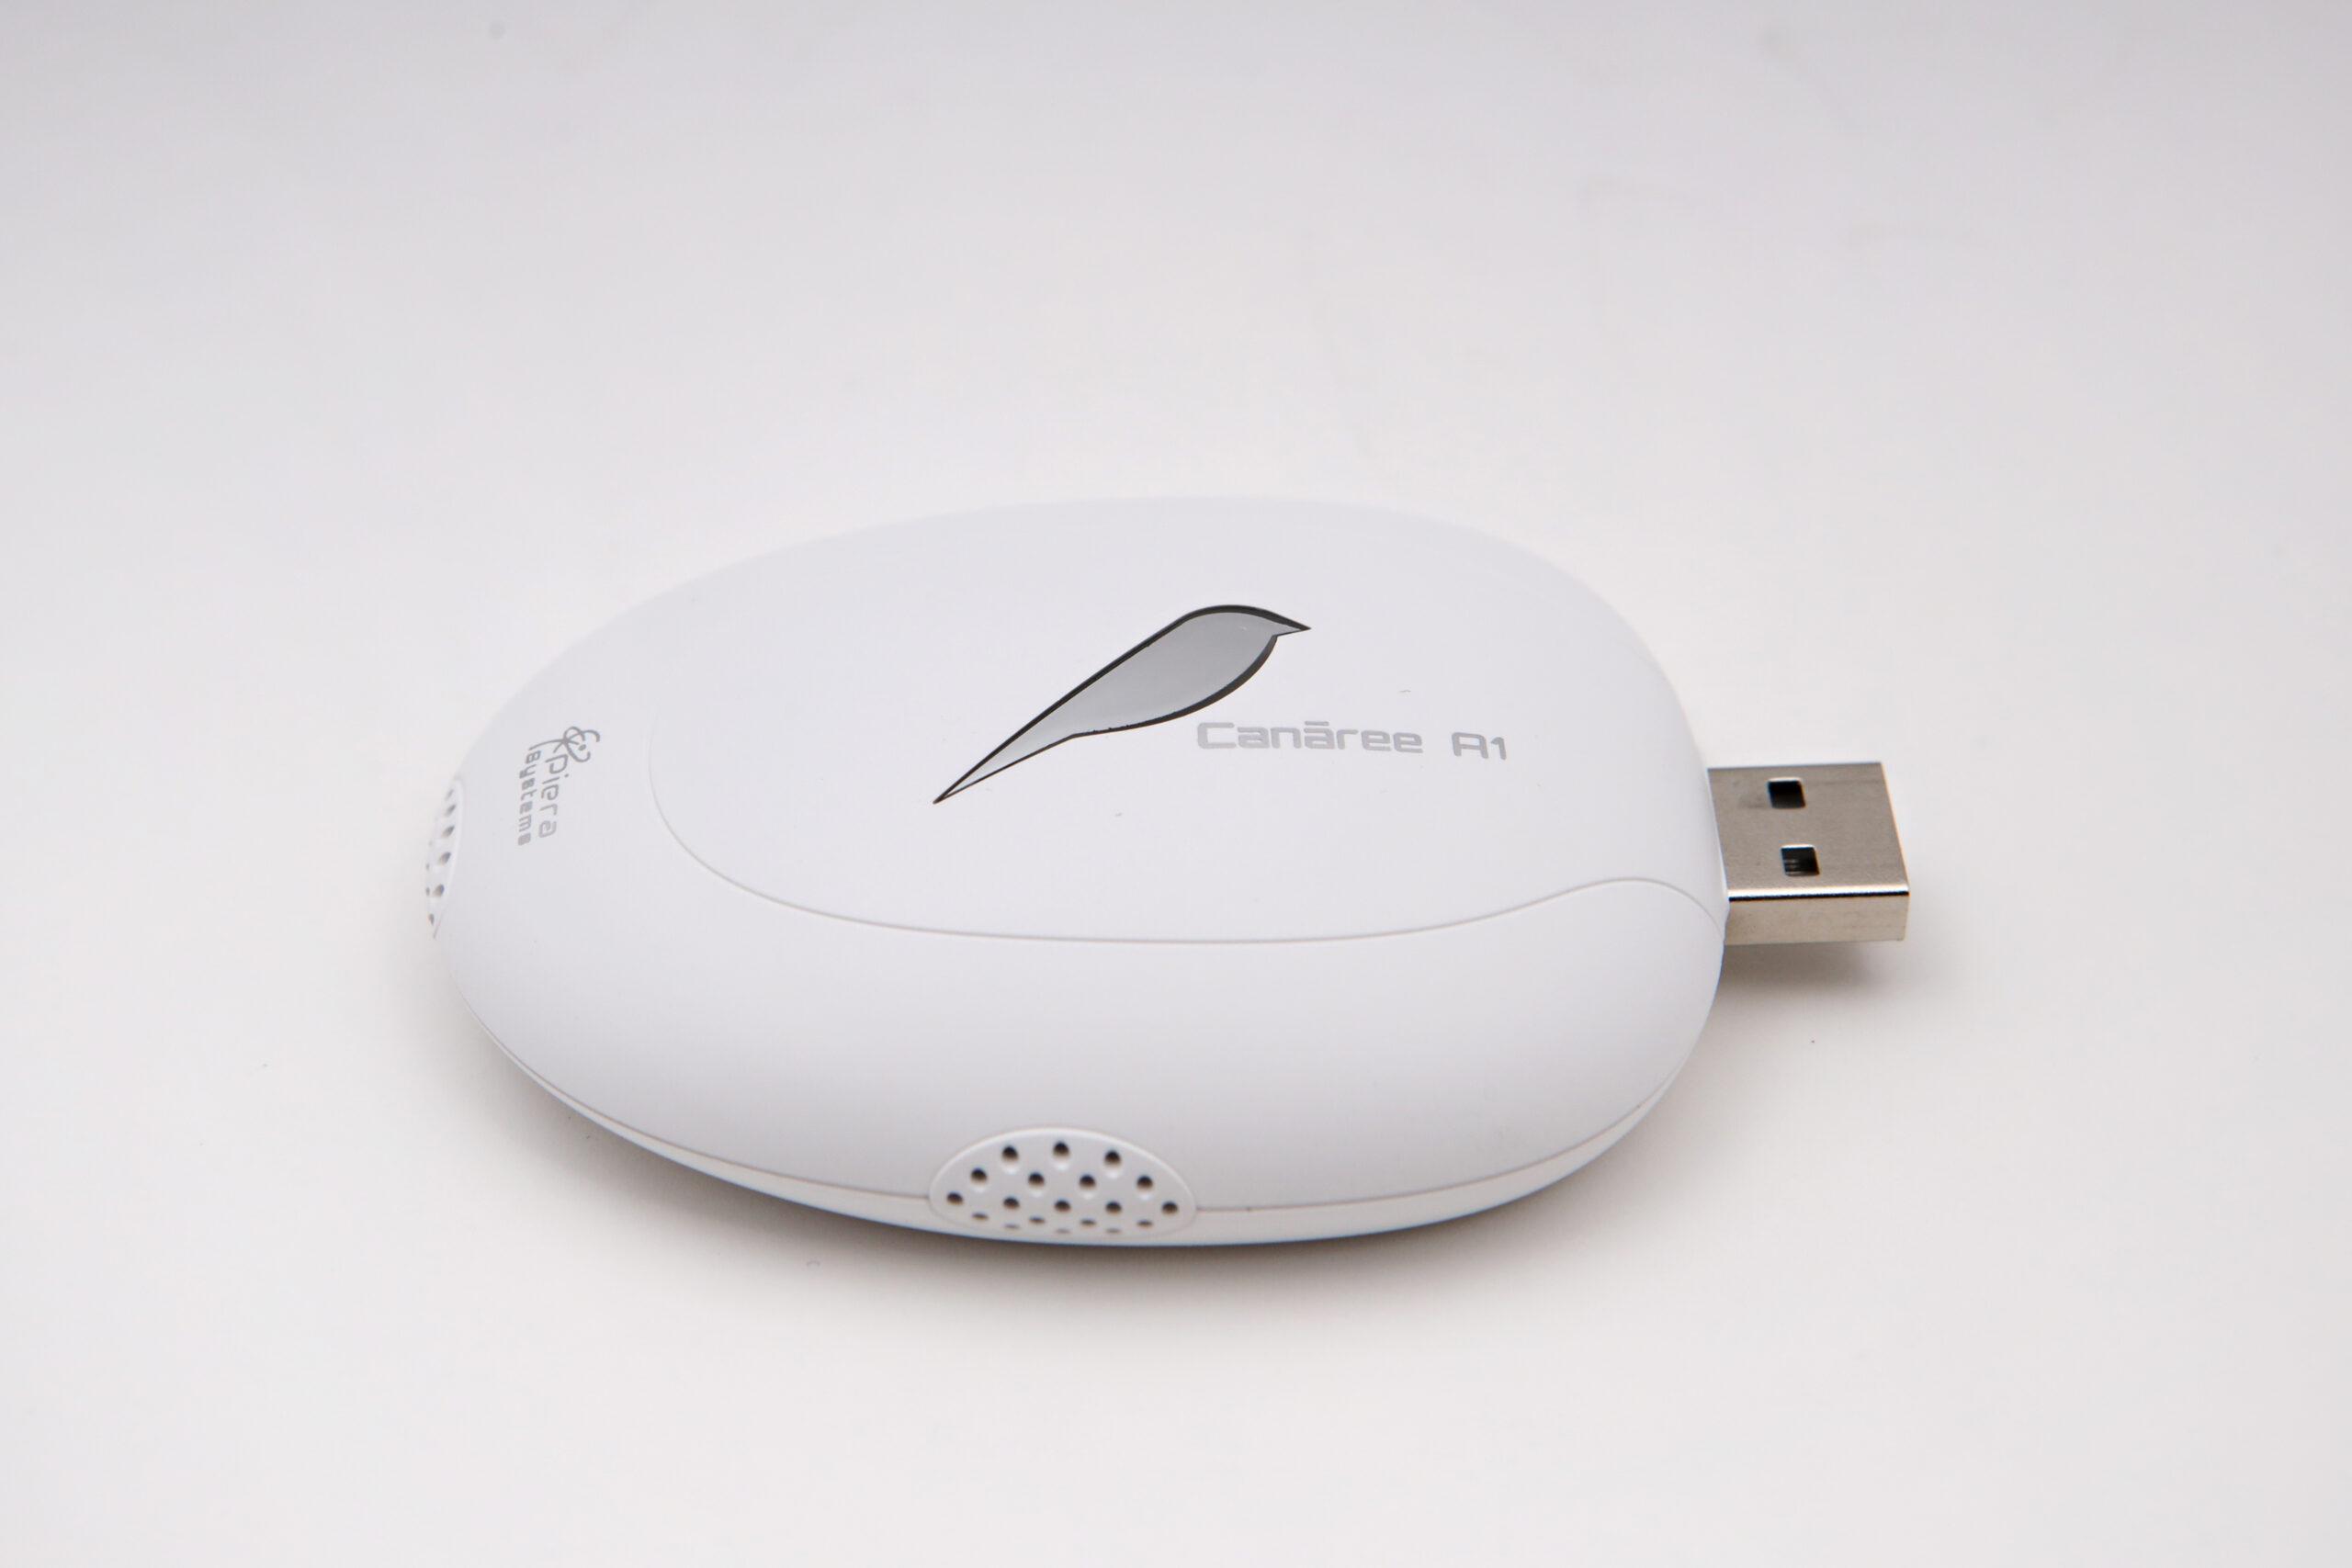 Product Canāree A1 for Aruba Access Points - Piera Systems image